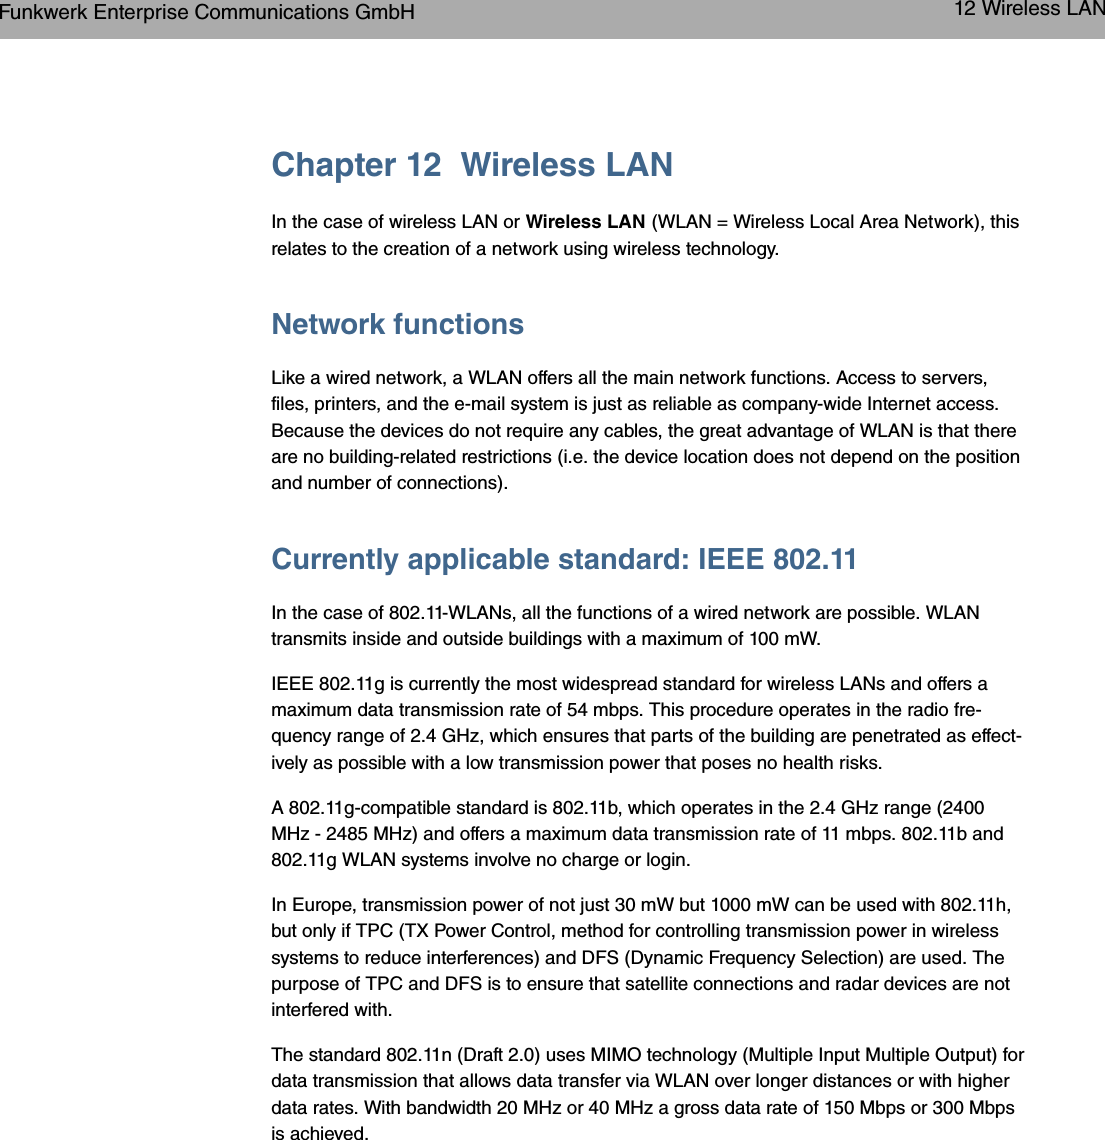 Chapter 12 Wireless LANIn the case of wireless LAN or Wireless LAN (WLAN = Wireless Local Area Network), thisrelates to the creation of a network using wireless technology.Network functionsLike a wired network, a WLAN offers all the main network functions. Access to servers,files, printers, and the e-mail system is just as reliable as company-wide Internet access.Because the devices do not require any cables, the great advantage of WLAN is that thereare no building-related restrictions (i.e. the device location does not depend on the positionand number of connections).Currently applicable standard: IEEE 802.11In the case of 802.11-WLANs, all the functions of a wired network are possible. WLANtransmits inside and outside buildings with a maximum of 100 mW.IEEE 802.11g is currently the most widespread standard for wireless LANs and offers amaximum data transmission rate of 54 mbps. This procedure operates in the radio fre-quency range of 2.4 GHz, which ensures that parts of the building are penetrated as effect-ively as possible with a low transmission power that poses no health risks.A 802.11g-compatible standard is 802.11b, which operates in the 2.4 GHz range (2400MHz - 2485 MHz) and offers a maximum data transmission rate of 11 mbps. 802.11b and802.11g WLAN systems involve no charge or login.In Europe, transmission power of not just 30 mW but 1000 mW can be used with 802.11h,but only if TPC (TX Power Control, method for controlling transmission power in wirelesssystems to reduce interferences) and DFS (Dynamic Frequency Selection) are used. Thepurpose of TPC and DFS is to ensure that satellite connections and radar devices are notinterfered with.The standard 802.11n (Draft 2.0) uses MIMO technology (Multiple Input Multiple Output) fordata transmission that allows data transfer via WLAN over longer distances or with higherdata rates. With bandwidth 20 MHz or 40 MHz a gross data rate of 150 Mbps or 300 Mbpsis achieved.Funkwerk Enterprise Communications GmbH 12 Wireless LANbintec WLAN and Industrial WLAN 115